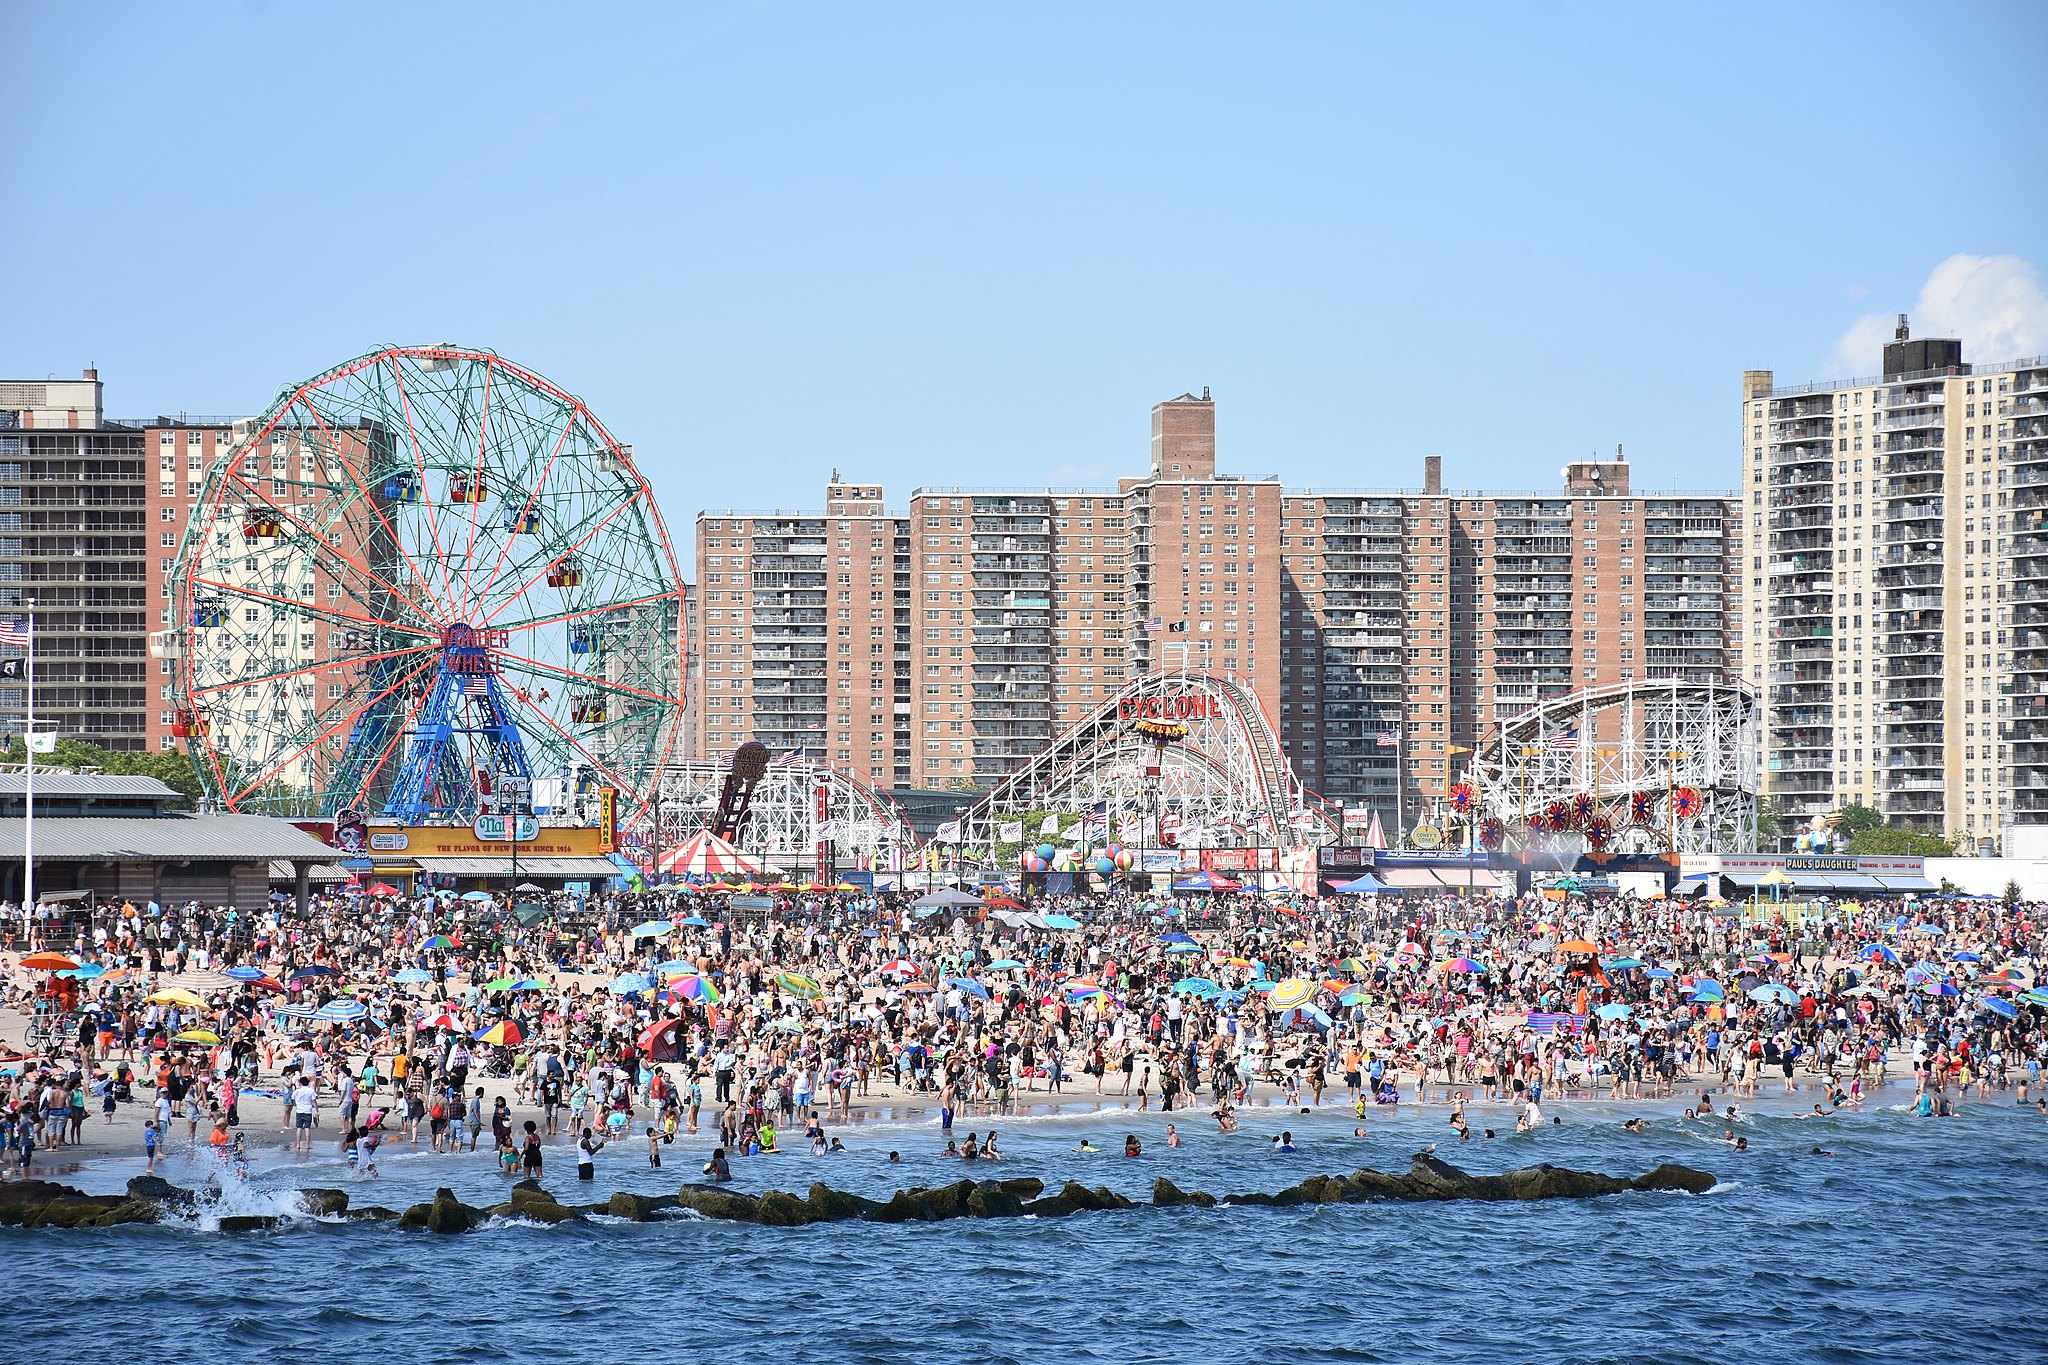 <p>Coney Island is located in the heart of South Brooklyn’s amusement district. It has a reputation as a circus-worthy tourist hot spot.</p><p>It’s a vast amusement park that includes attractions of all kinds for all ages.</p><p><strong>Features:</strong> Rides, restaurants, shops, roller-coasters, go-karting, live entertainment, boardwalk games, beachfront activities, and so much more.</p><p>GPA Photo Archive, Flickr</p>